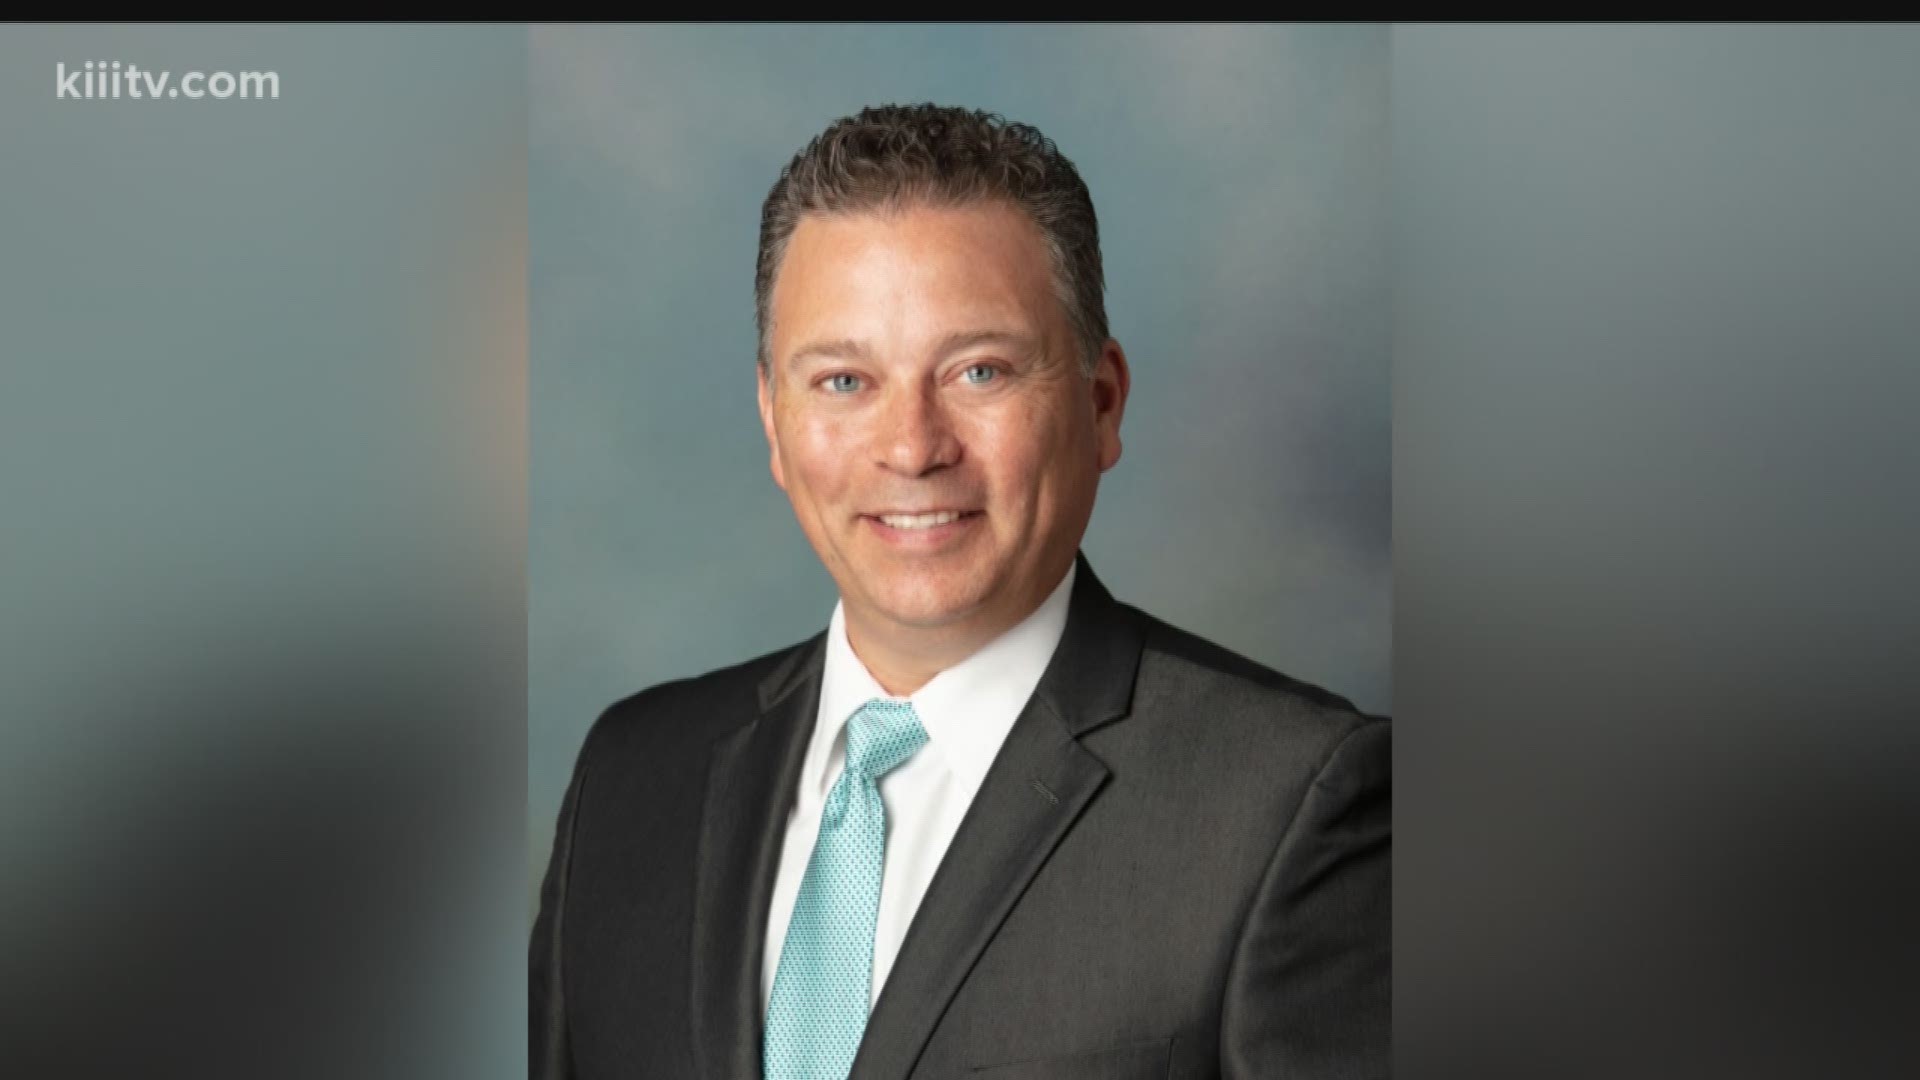 Students in the Robstown Independent School District will be starting their school year with a new superintendent.